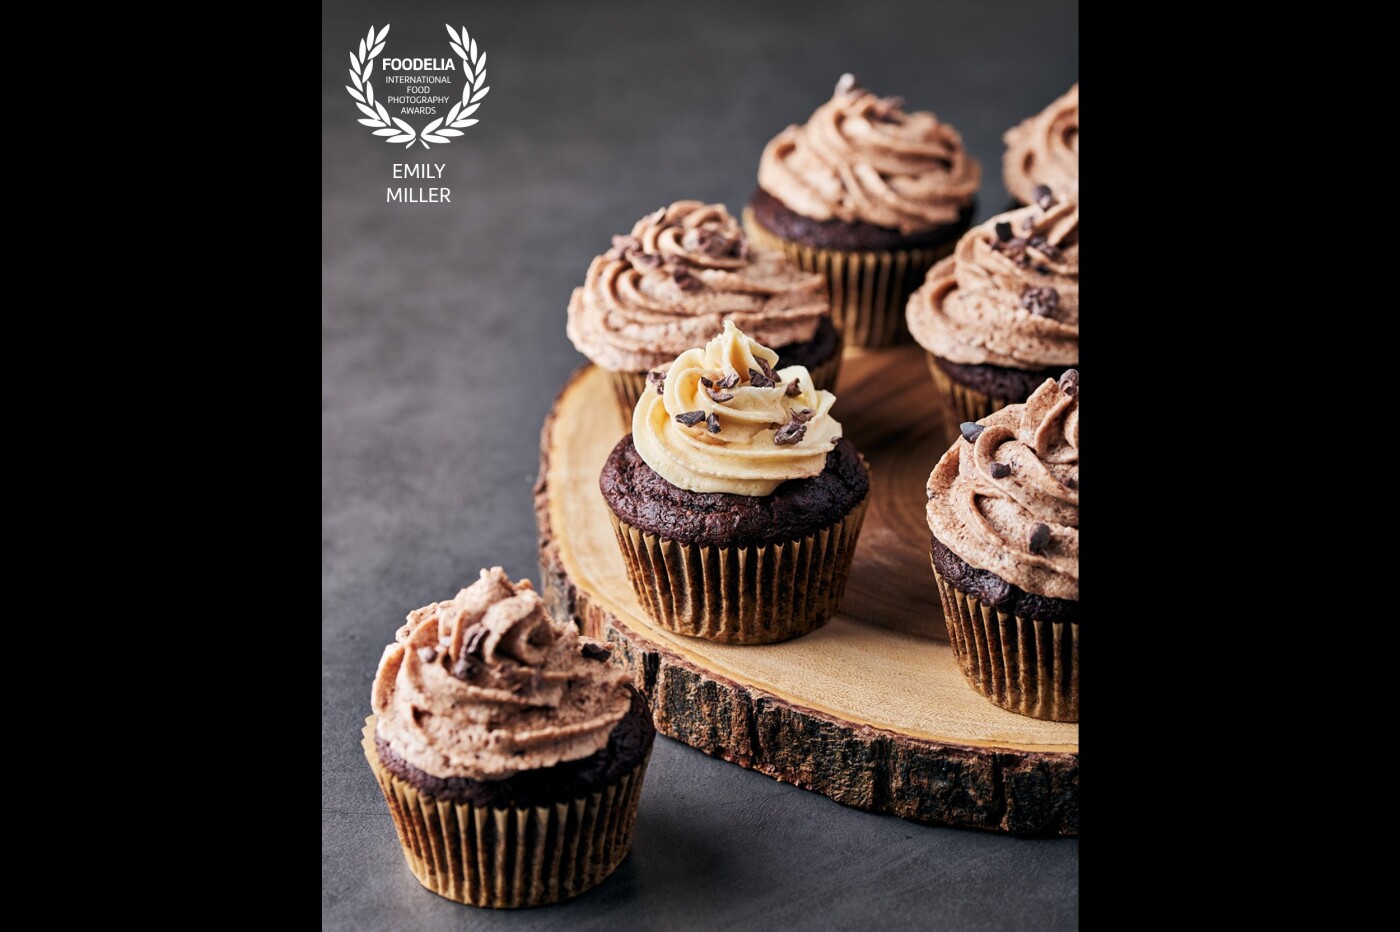 Homemade Vegan Chocolate Fig Cupcakes with Irish Cream Frosting, and Fig Irish Cream Frosting. Nikon D810, 105mm/2.8, ISO 100, 1/160 sec, f/7.1 with Godox SK400ii strobe.